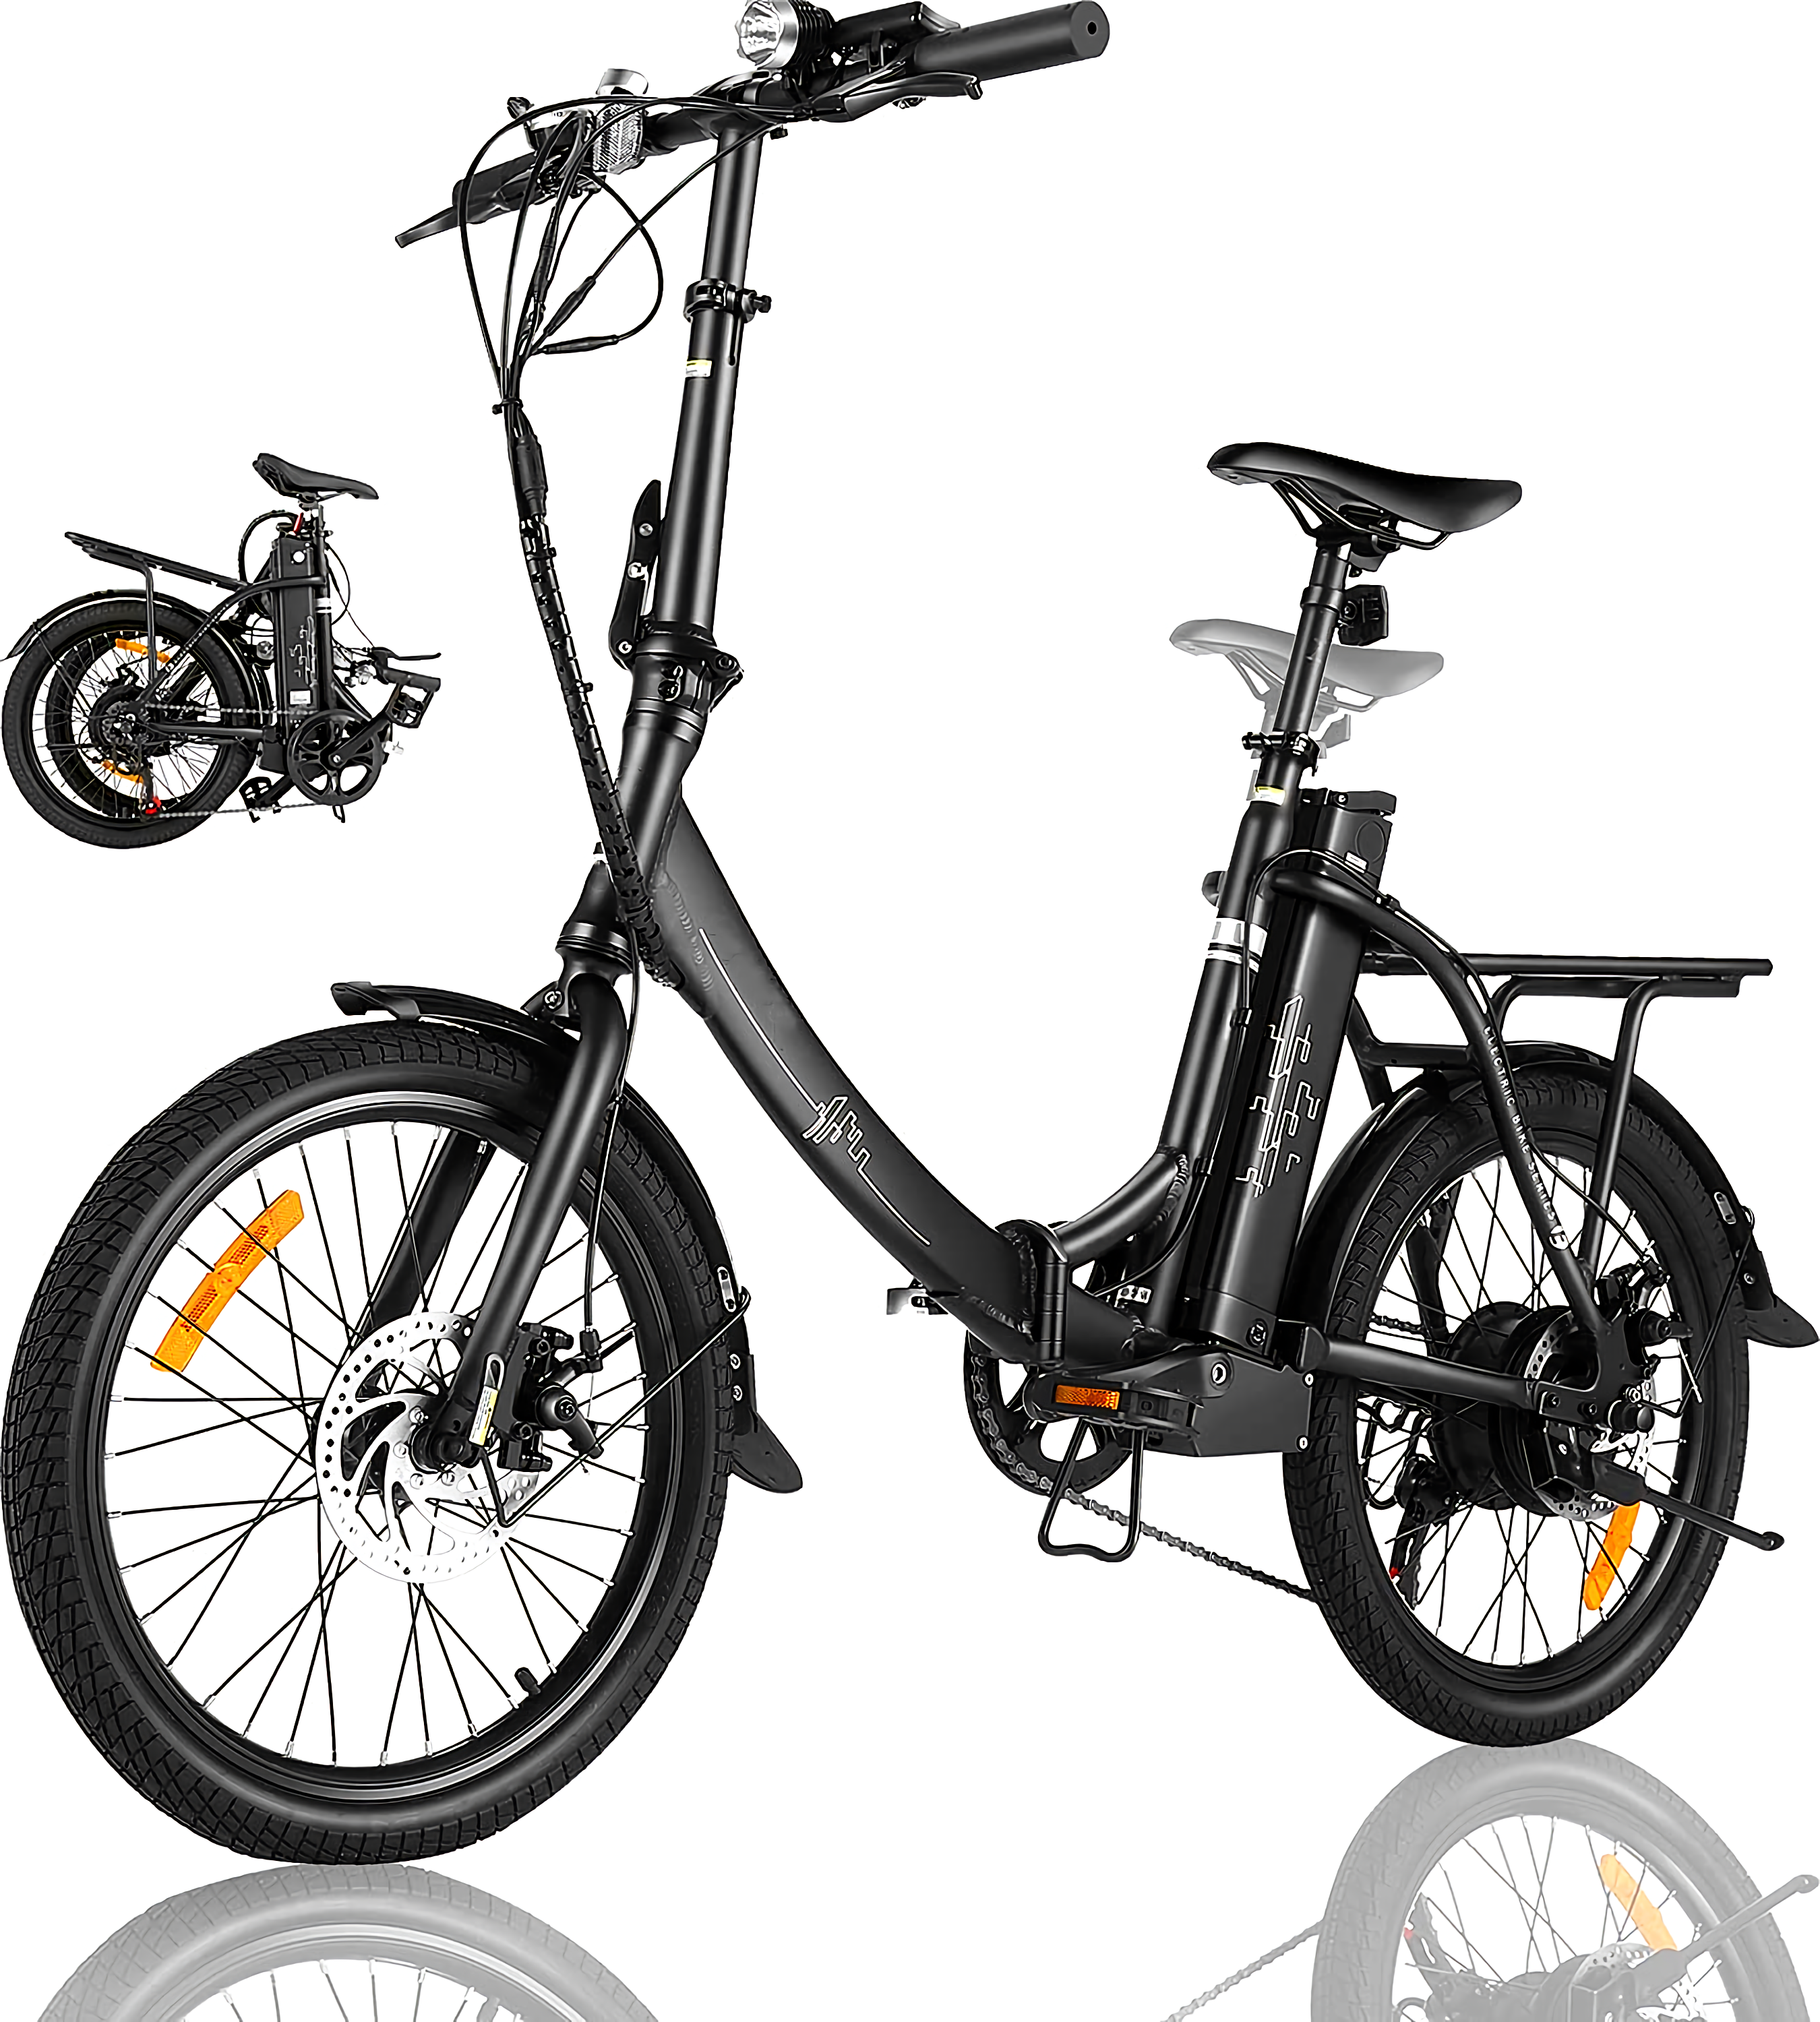 20'' Folding Electric Bike 350W Electric Mountain Bike Commuter Bicycle for Adults, 20Mph Hybrid Ebike Throttle & Pedal Assist Moped City Commuter Bicycle 7 Speed